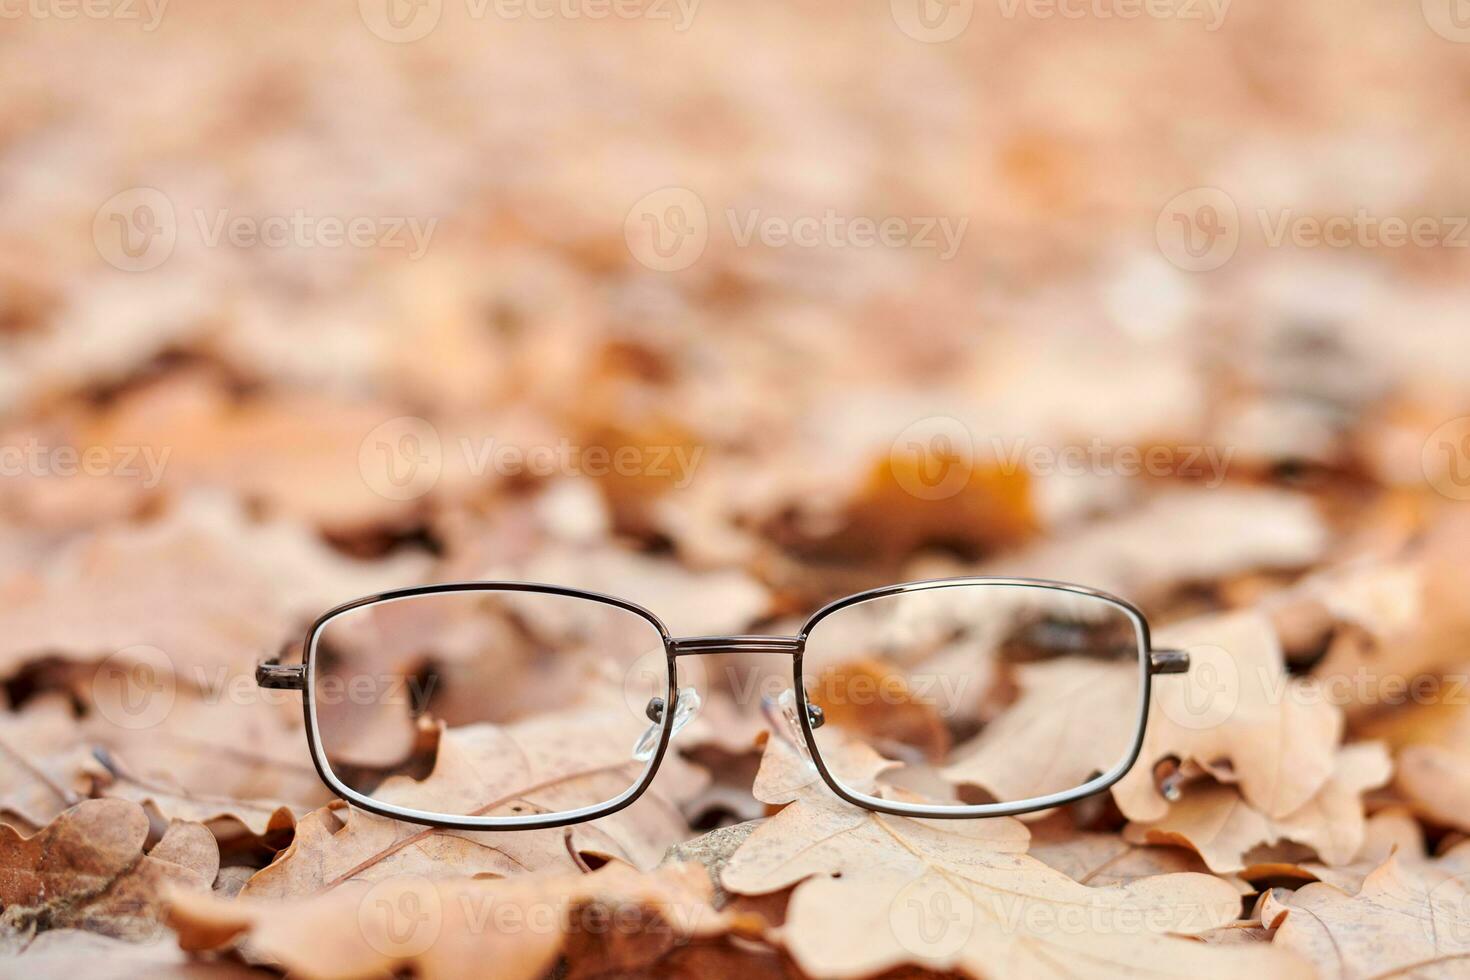 Lost glasses as symbol of sudden vision loss. photo